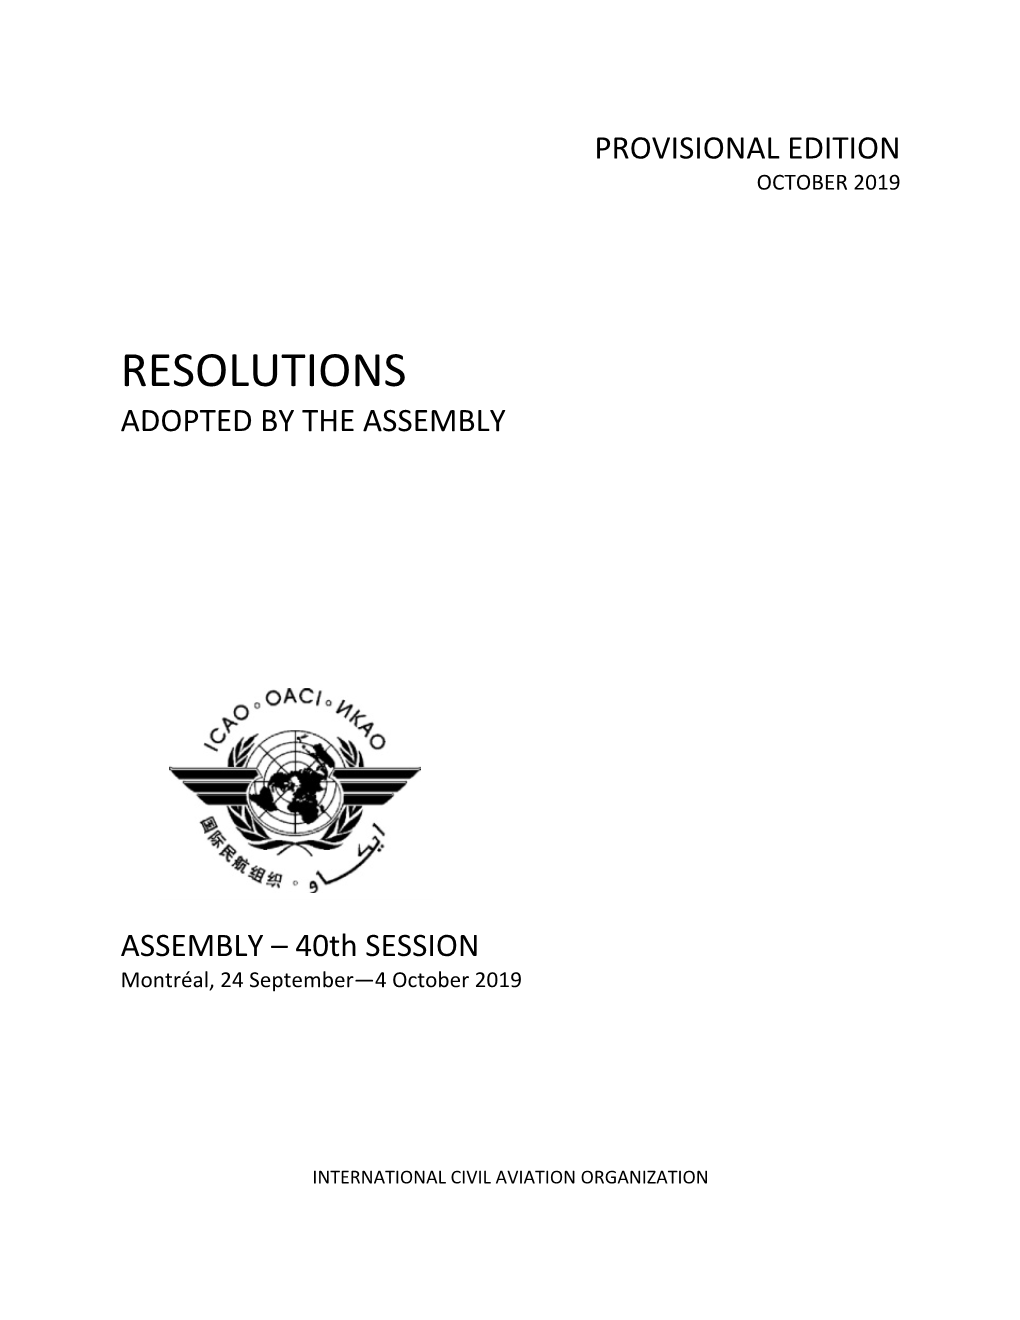 Resolutions Adopted by the Assembly